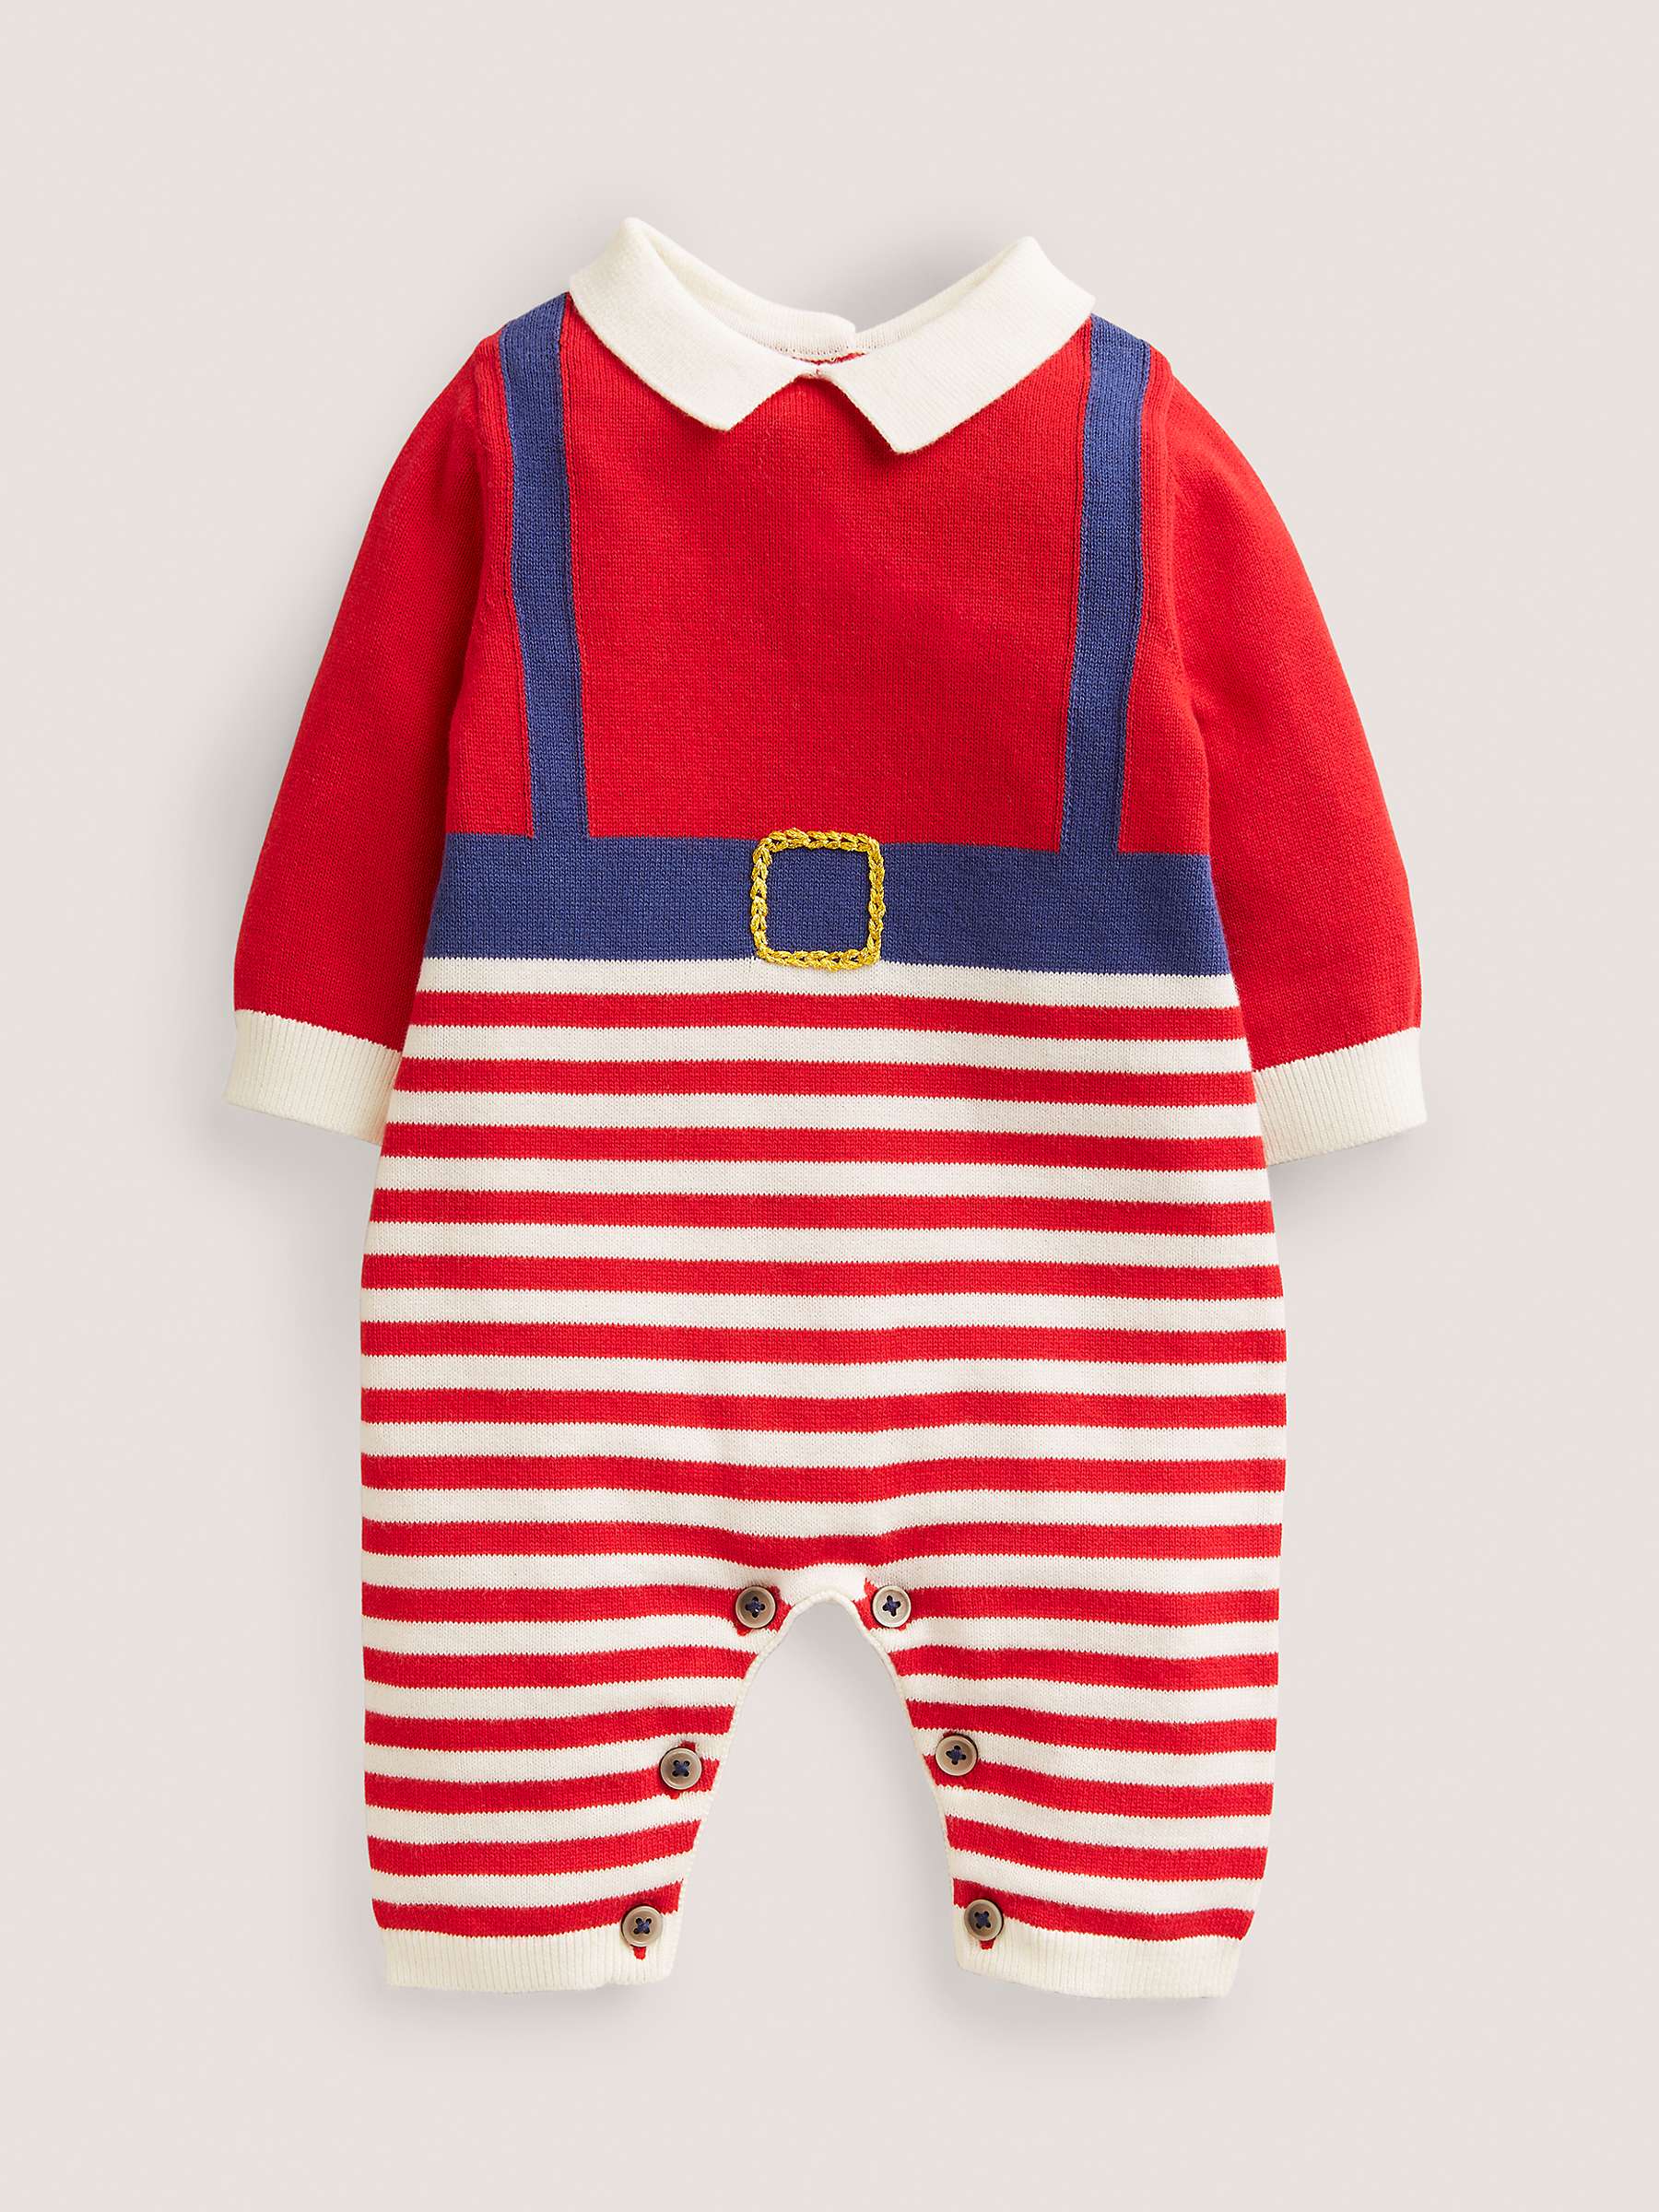 Buy Mini Boden Baby Santa Cotton Knitted Romper, Rockabilly Red Online at johnlewis.com